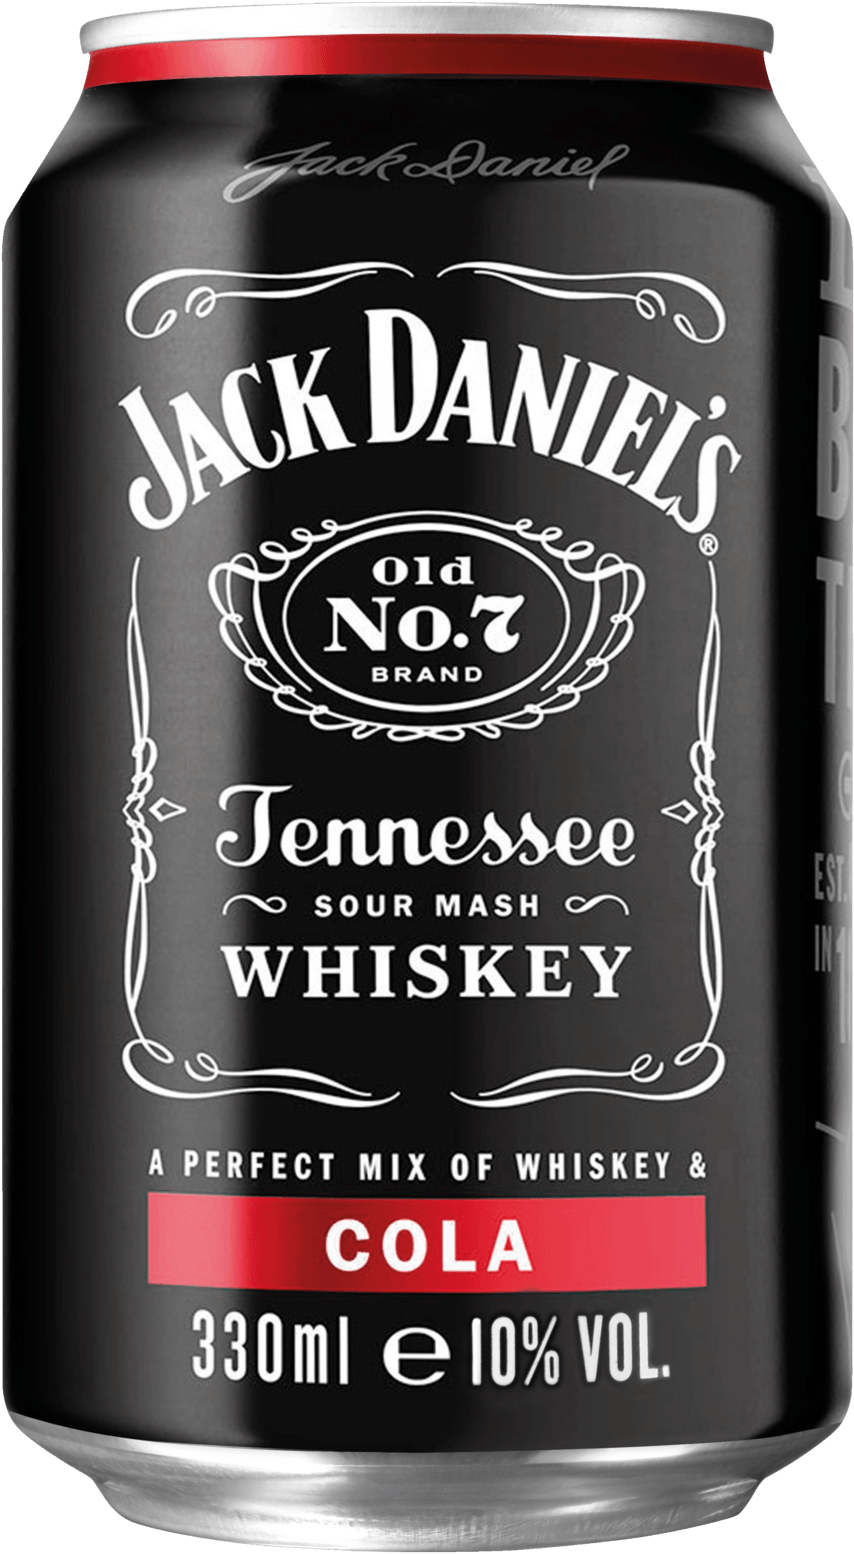 A Black Bottle With White Text With Jack Daniel's In The Background